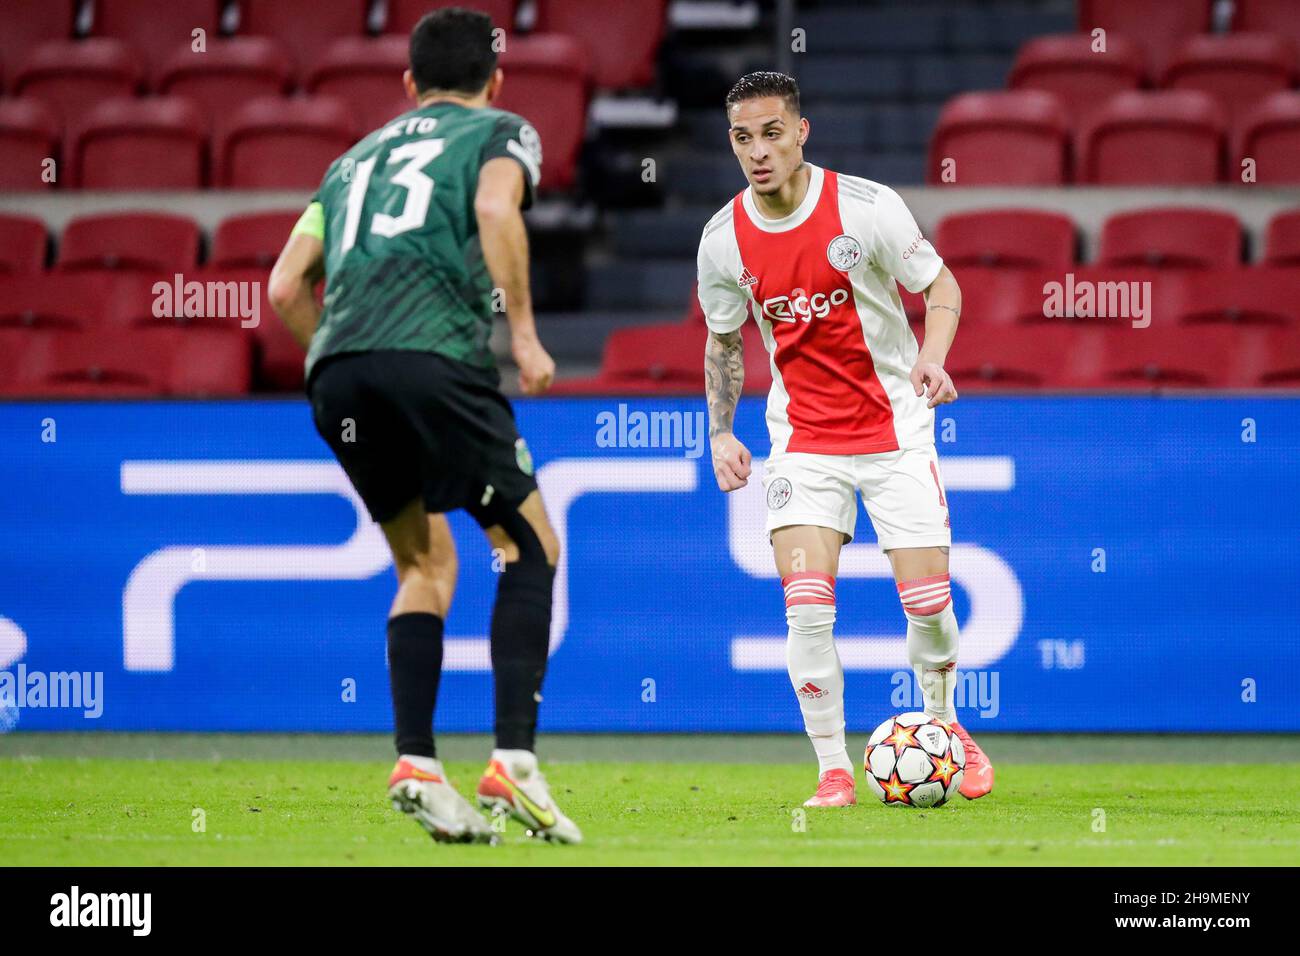 AMSTERDAM, NETHERLANDS - DECEMBER 7: Luis Neto of Sporting CP and Antony of Ajax during the UEFA Champions League match between Ajax and Sporting Clube de Portugal at Johan Cruijff ArenA on December 7, 2021 in Amsterdam, Netherlands (Photo by Peter Lous/Orange Pictures) Stock Photo